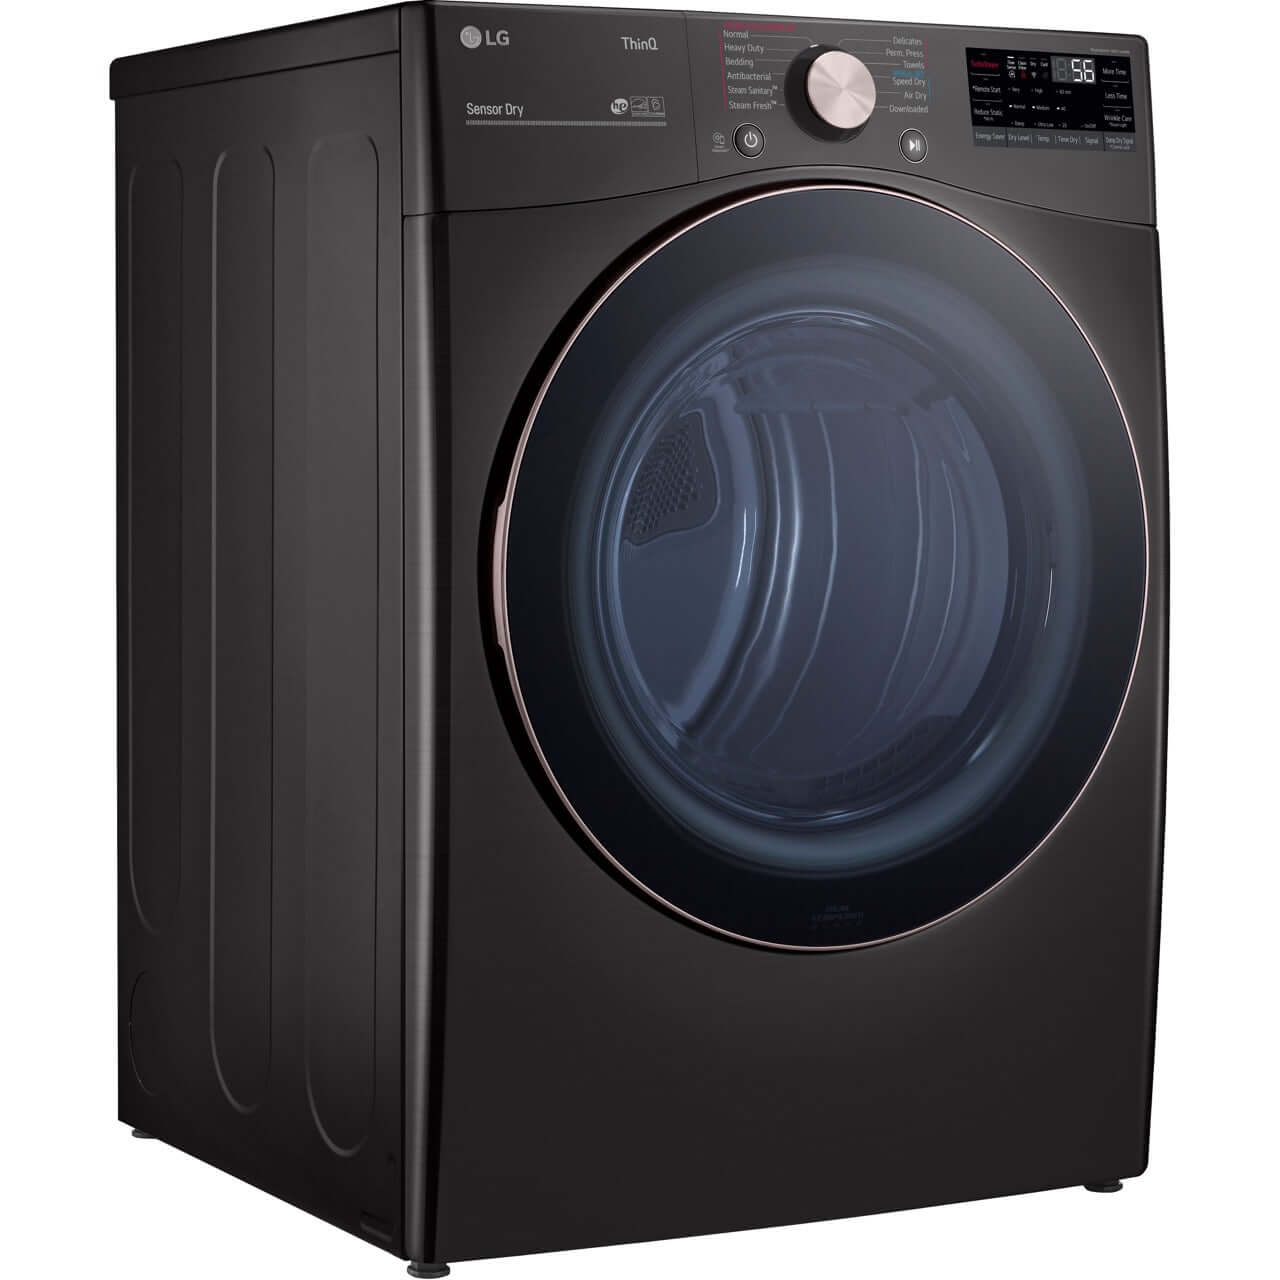 LG 27 In. 7.4-Cu. Ft. Front Load Gas Dryer with TurboSteam and Built-In Intelligence in Black Steel (DLGX4001B)